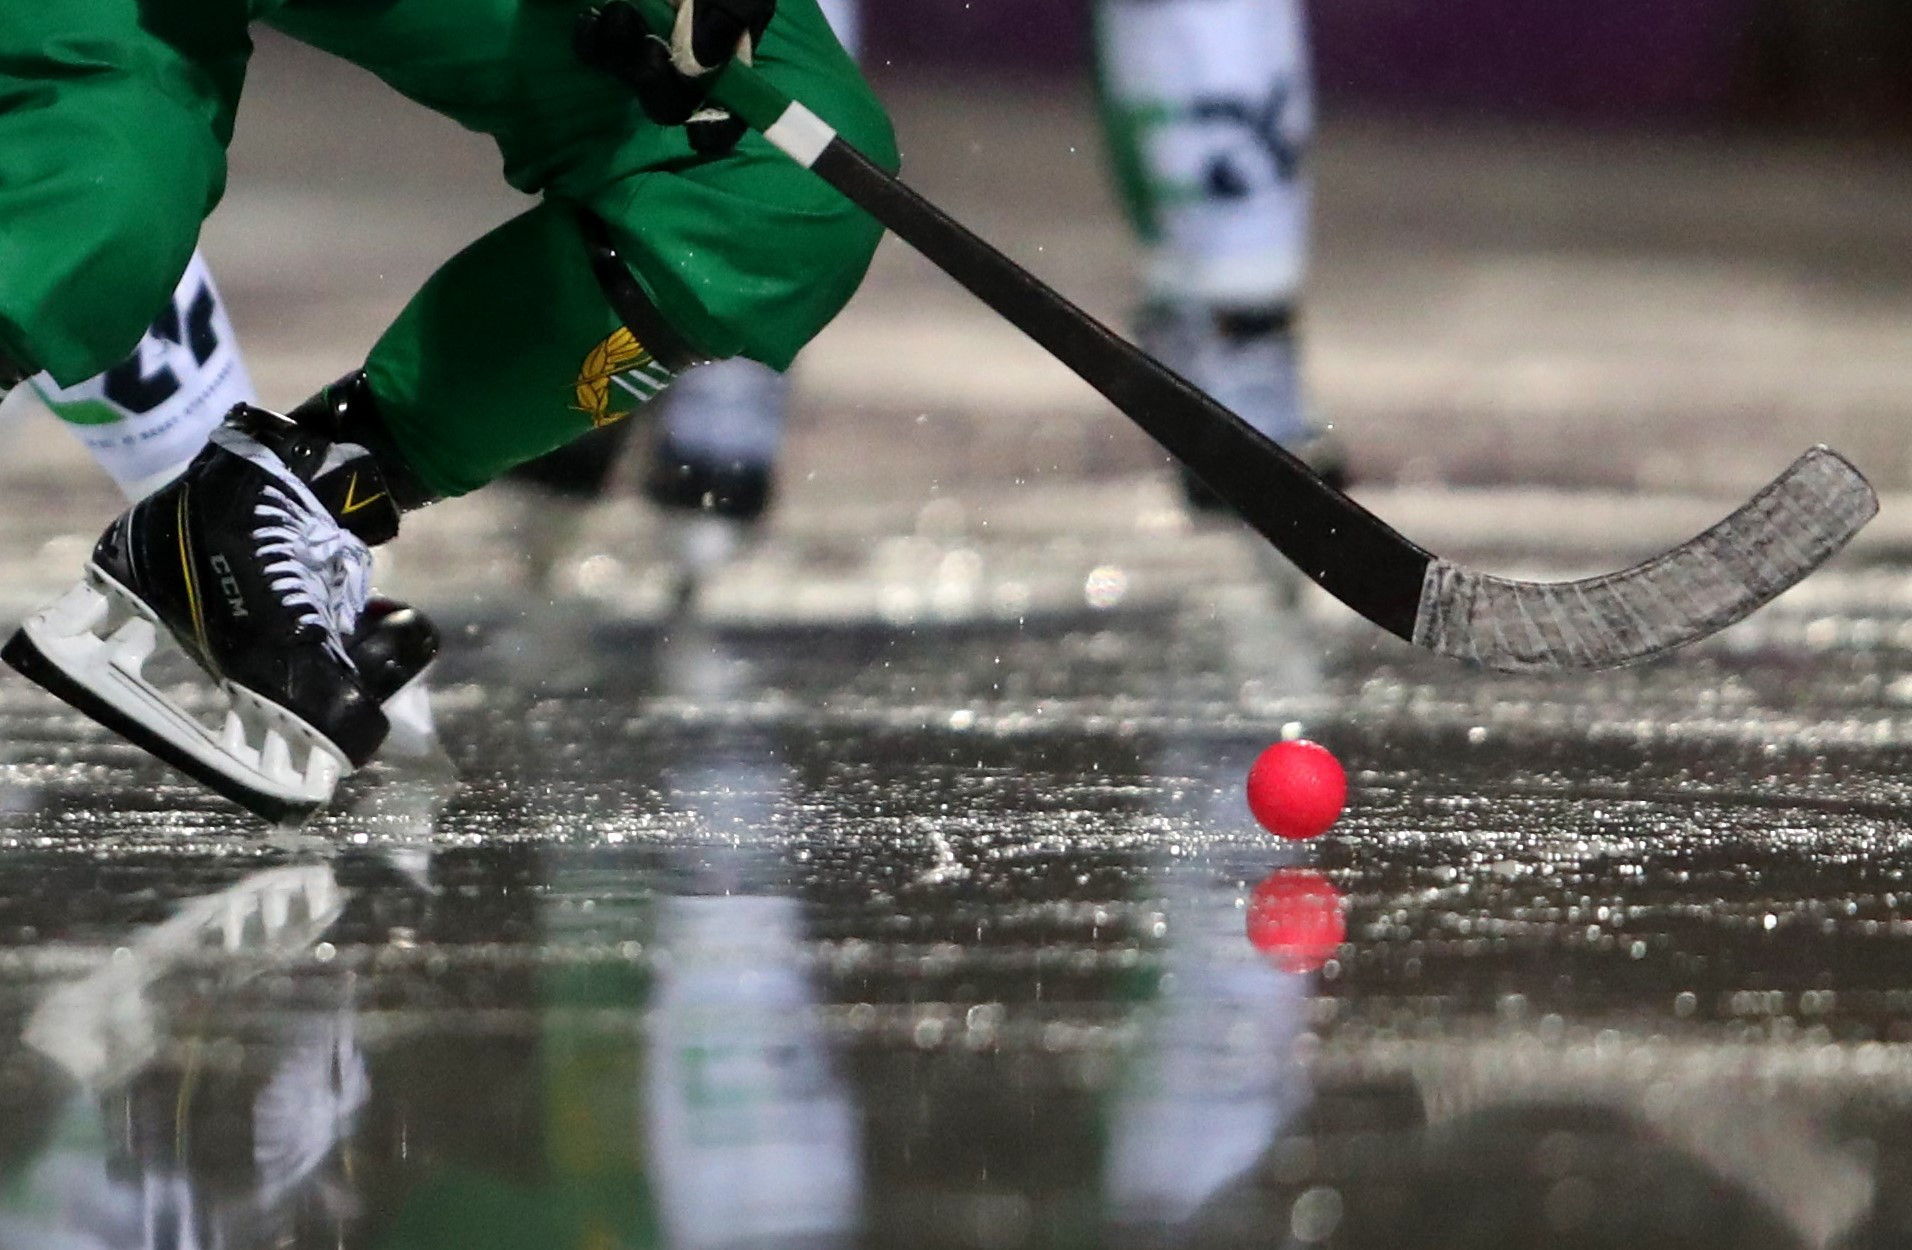 Women's Bandy World Championship delayed and moved from Stockholm